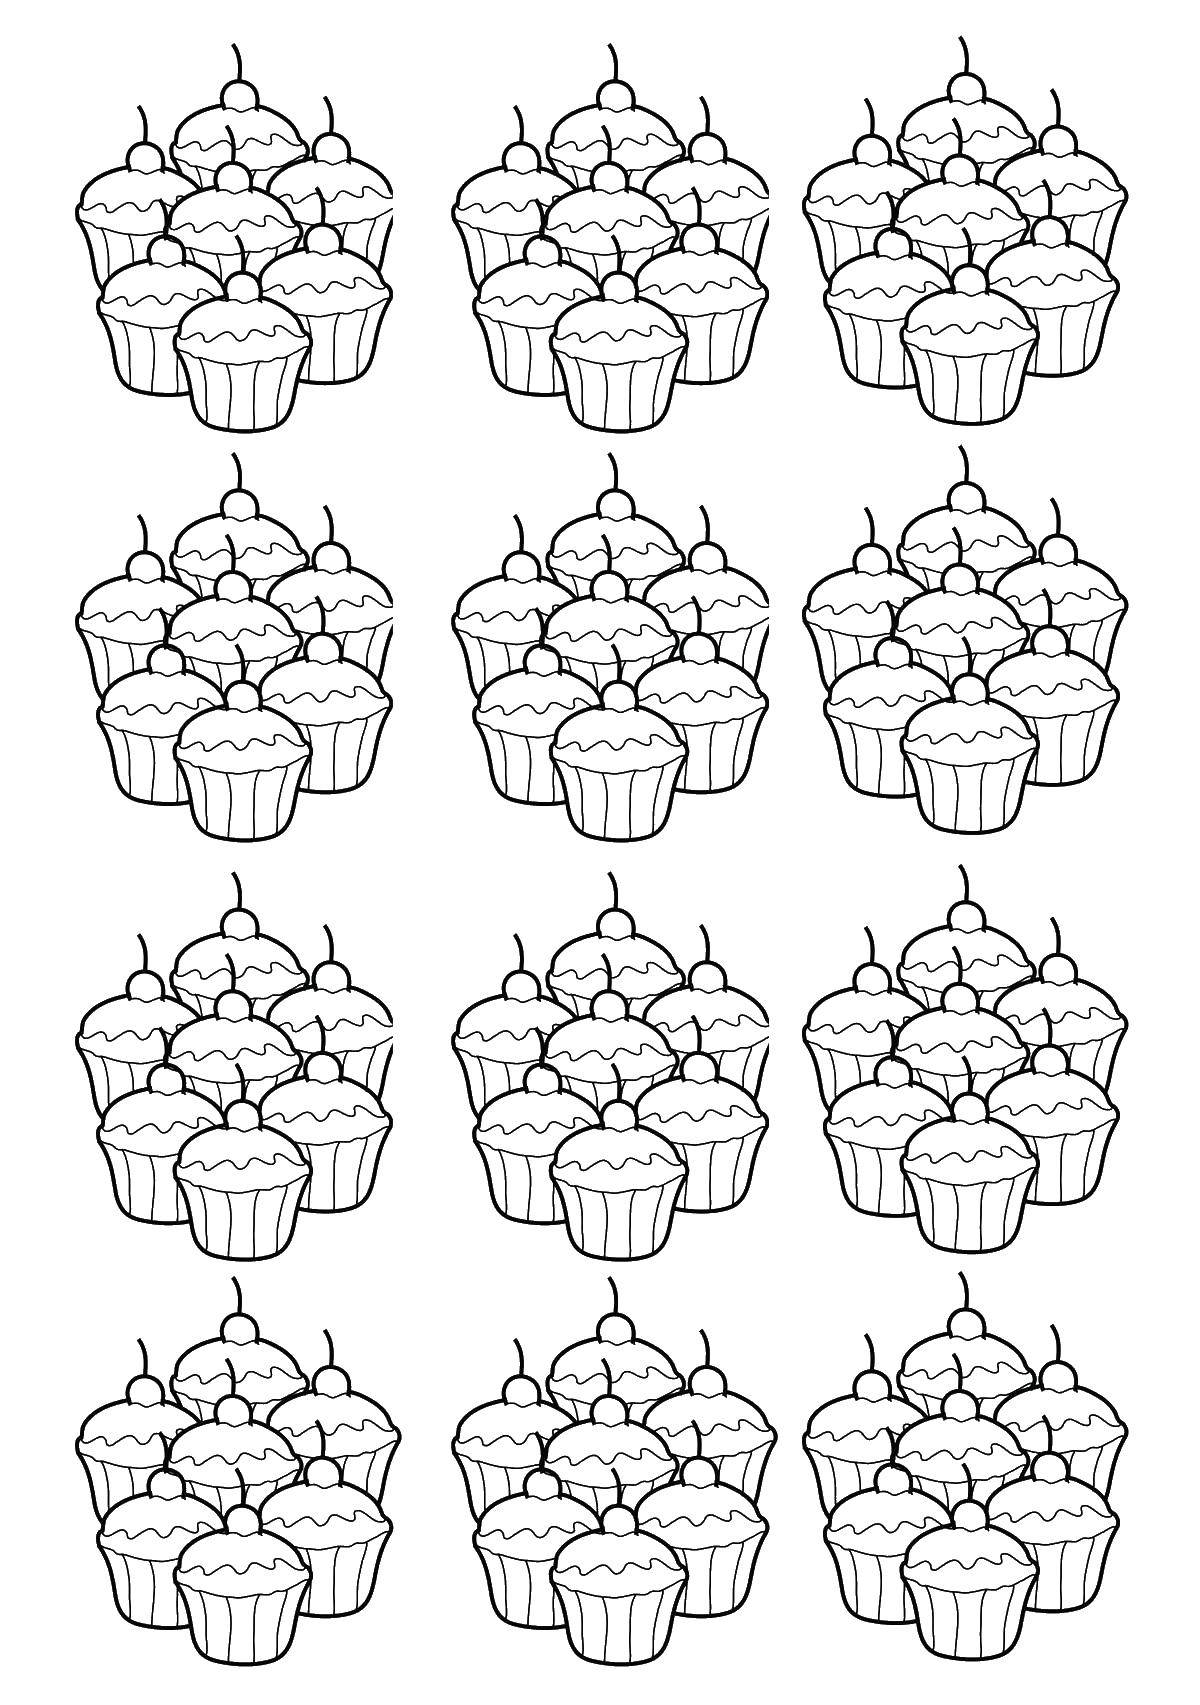 Coloring Cupcakes. Category sweets. Tags:  sweets, cupcake, brownie.